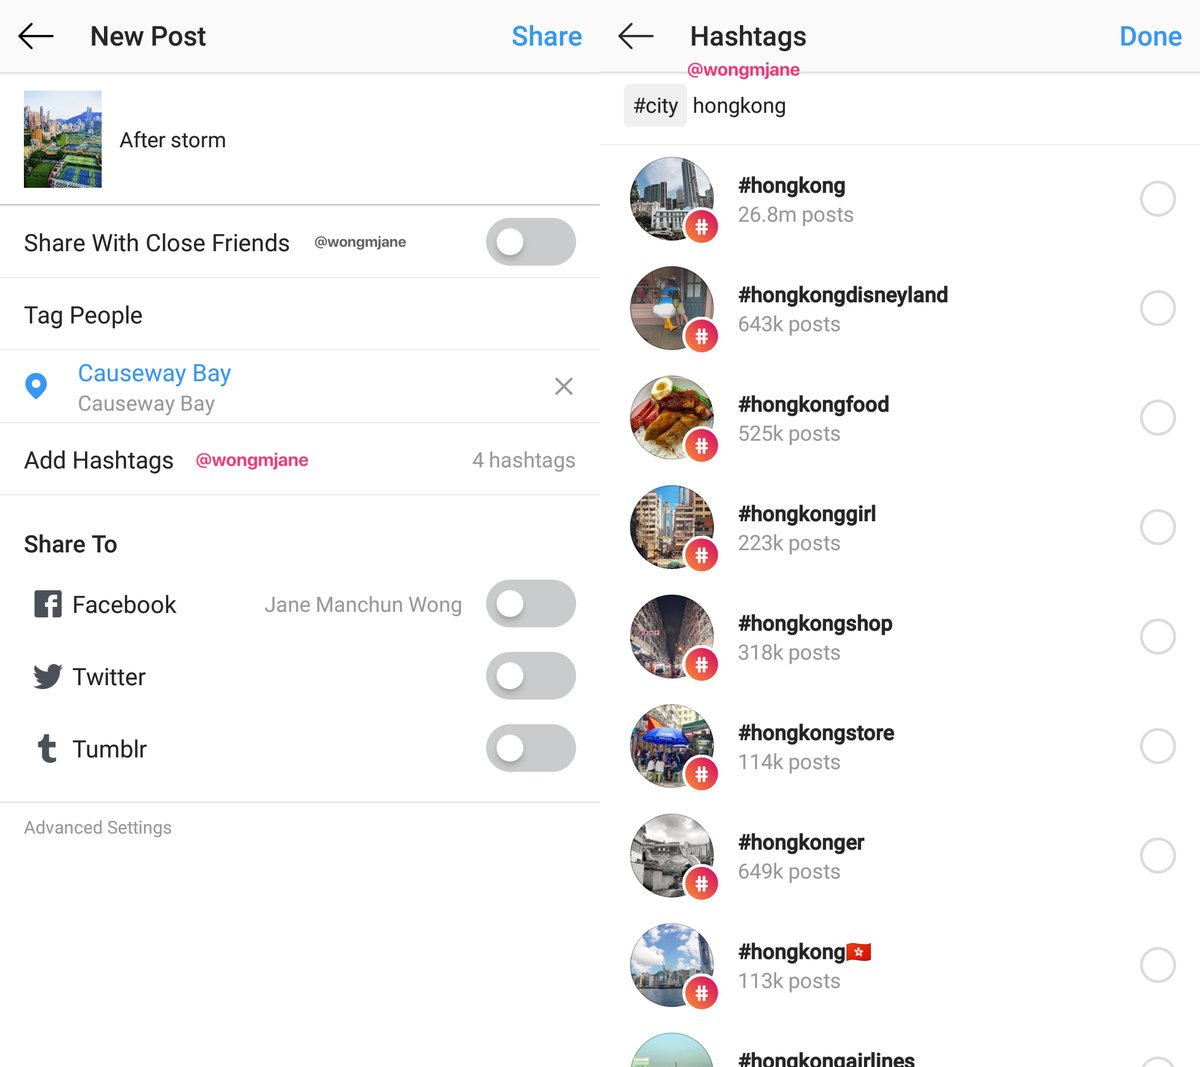 Instagram Is Testing A New Section for Adding Hashtags to Your Posts